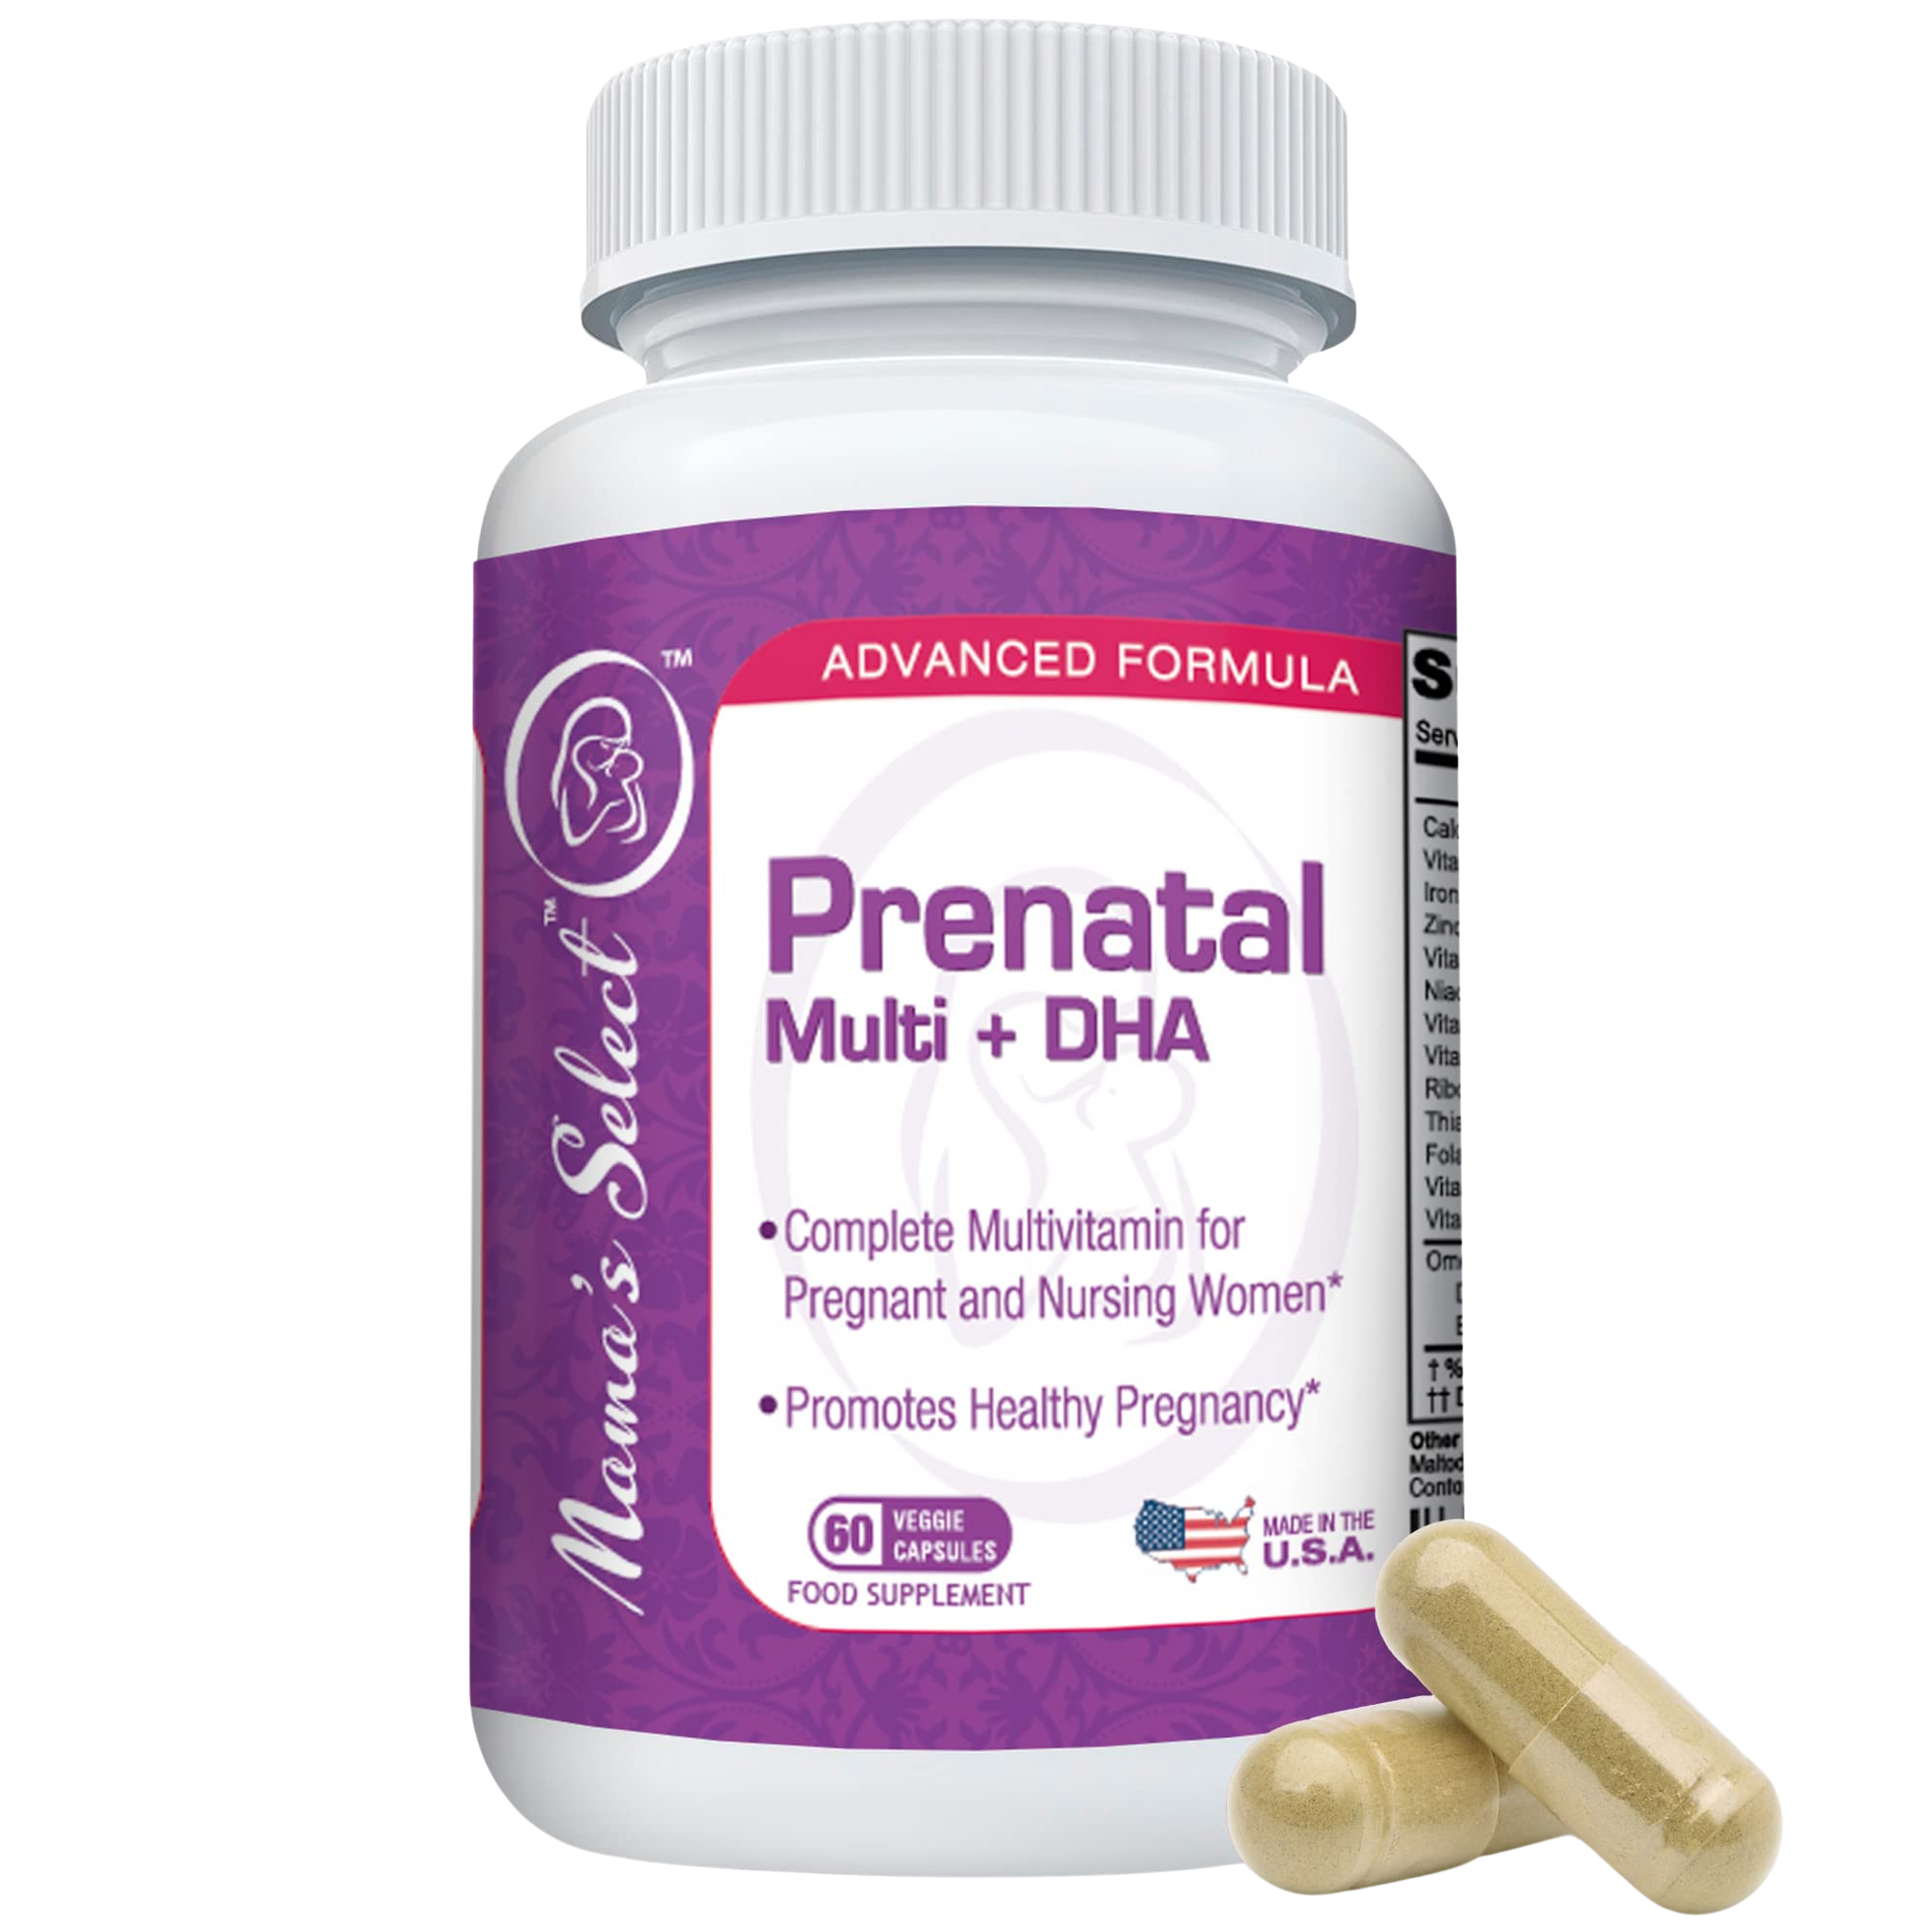 Mama's Select Prenatal Vitamins for Women with Iron, Vitamin D, DHA, and Folic Acid for Pregnant Women, Methyl Folate Safe for MTHFR